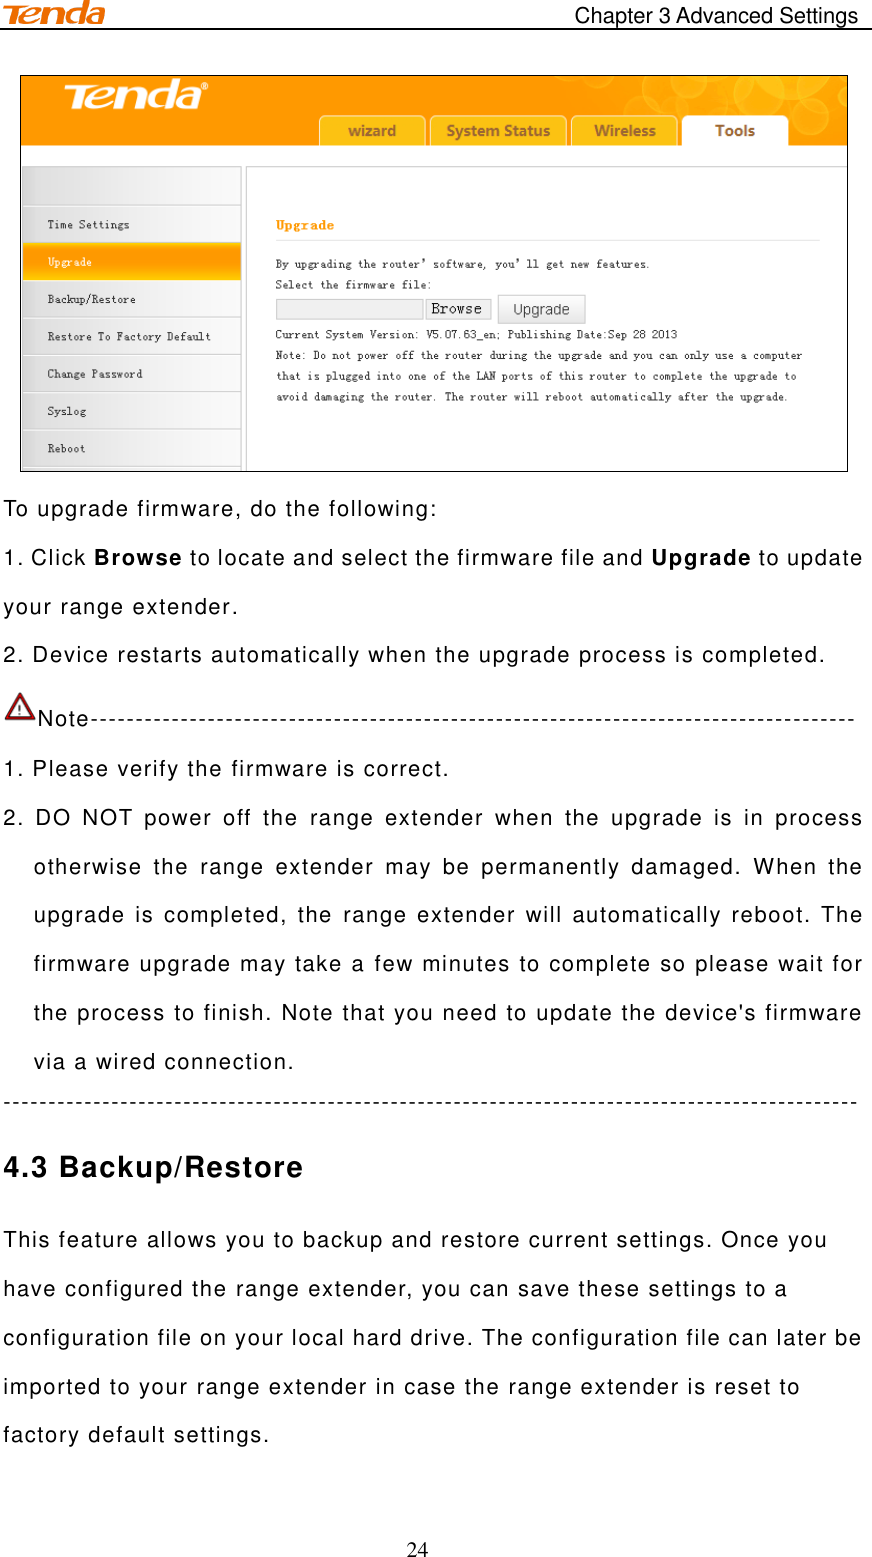                                            Chapter 3 Advanced Settings 24  To upgrade firmware, do the following: 1. Click Browse to locate and select the firmware file and Upgrade to update your range extender. 2. Device restarts automatically when the upgrade process is completed.  Note-------------------------------------------------------------------------------------   1. Please verify the firmware is correct. 2.  DO  NOT  power  off  the  range  extender  when  the  upgrade  is  in  process otherwise  the  range  extender  may  be  permanently  damaged.  When  the upgrade  is  completed,  the  range  extender  will automatically reboot.  The firmware upgrade may take a few minutes to complete so please wait for the process to finish. Note that you need to update the device&apos;s firmware via a wired connection. ----------------------------------------------------------------------------------------------- 4.3 Backup/Restore This feature allows you to backup and restore current settings. Once you have configured the range extender, you can save these settings to a configuration file on your local hard drive. The configuration file can later be imported to your range extender in case the range extender is reset to factory default settings. 